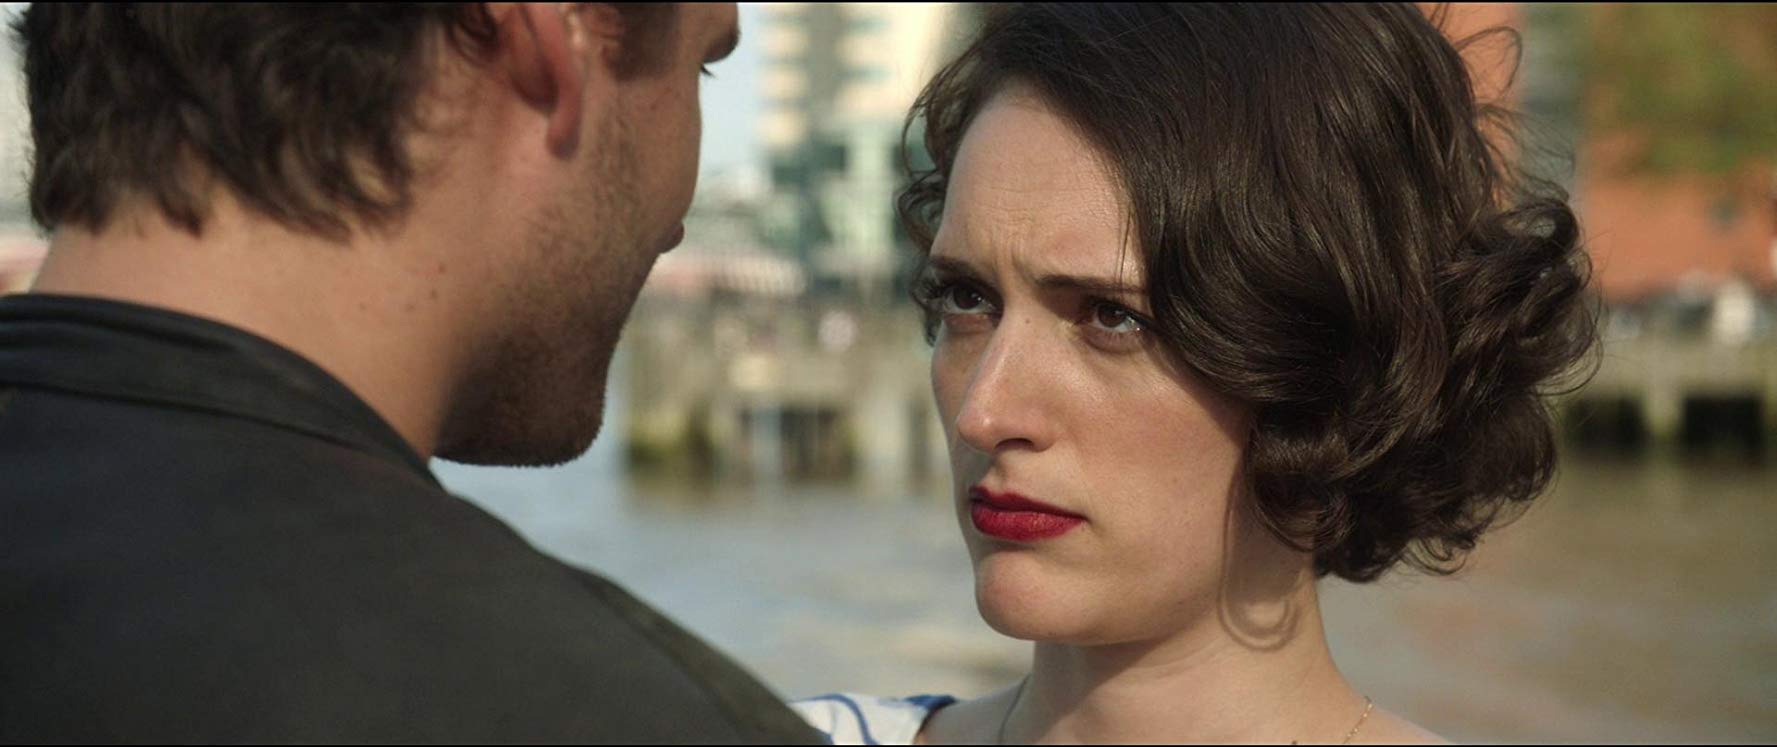 Image of a woman and the back of man's head from the TV series, Fleabag